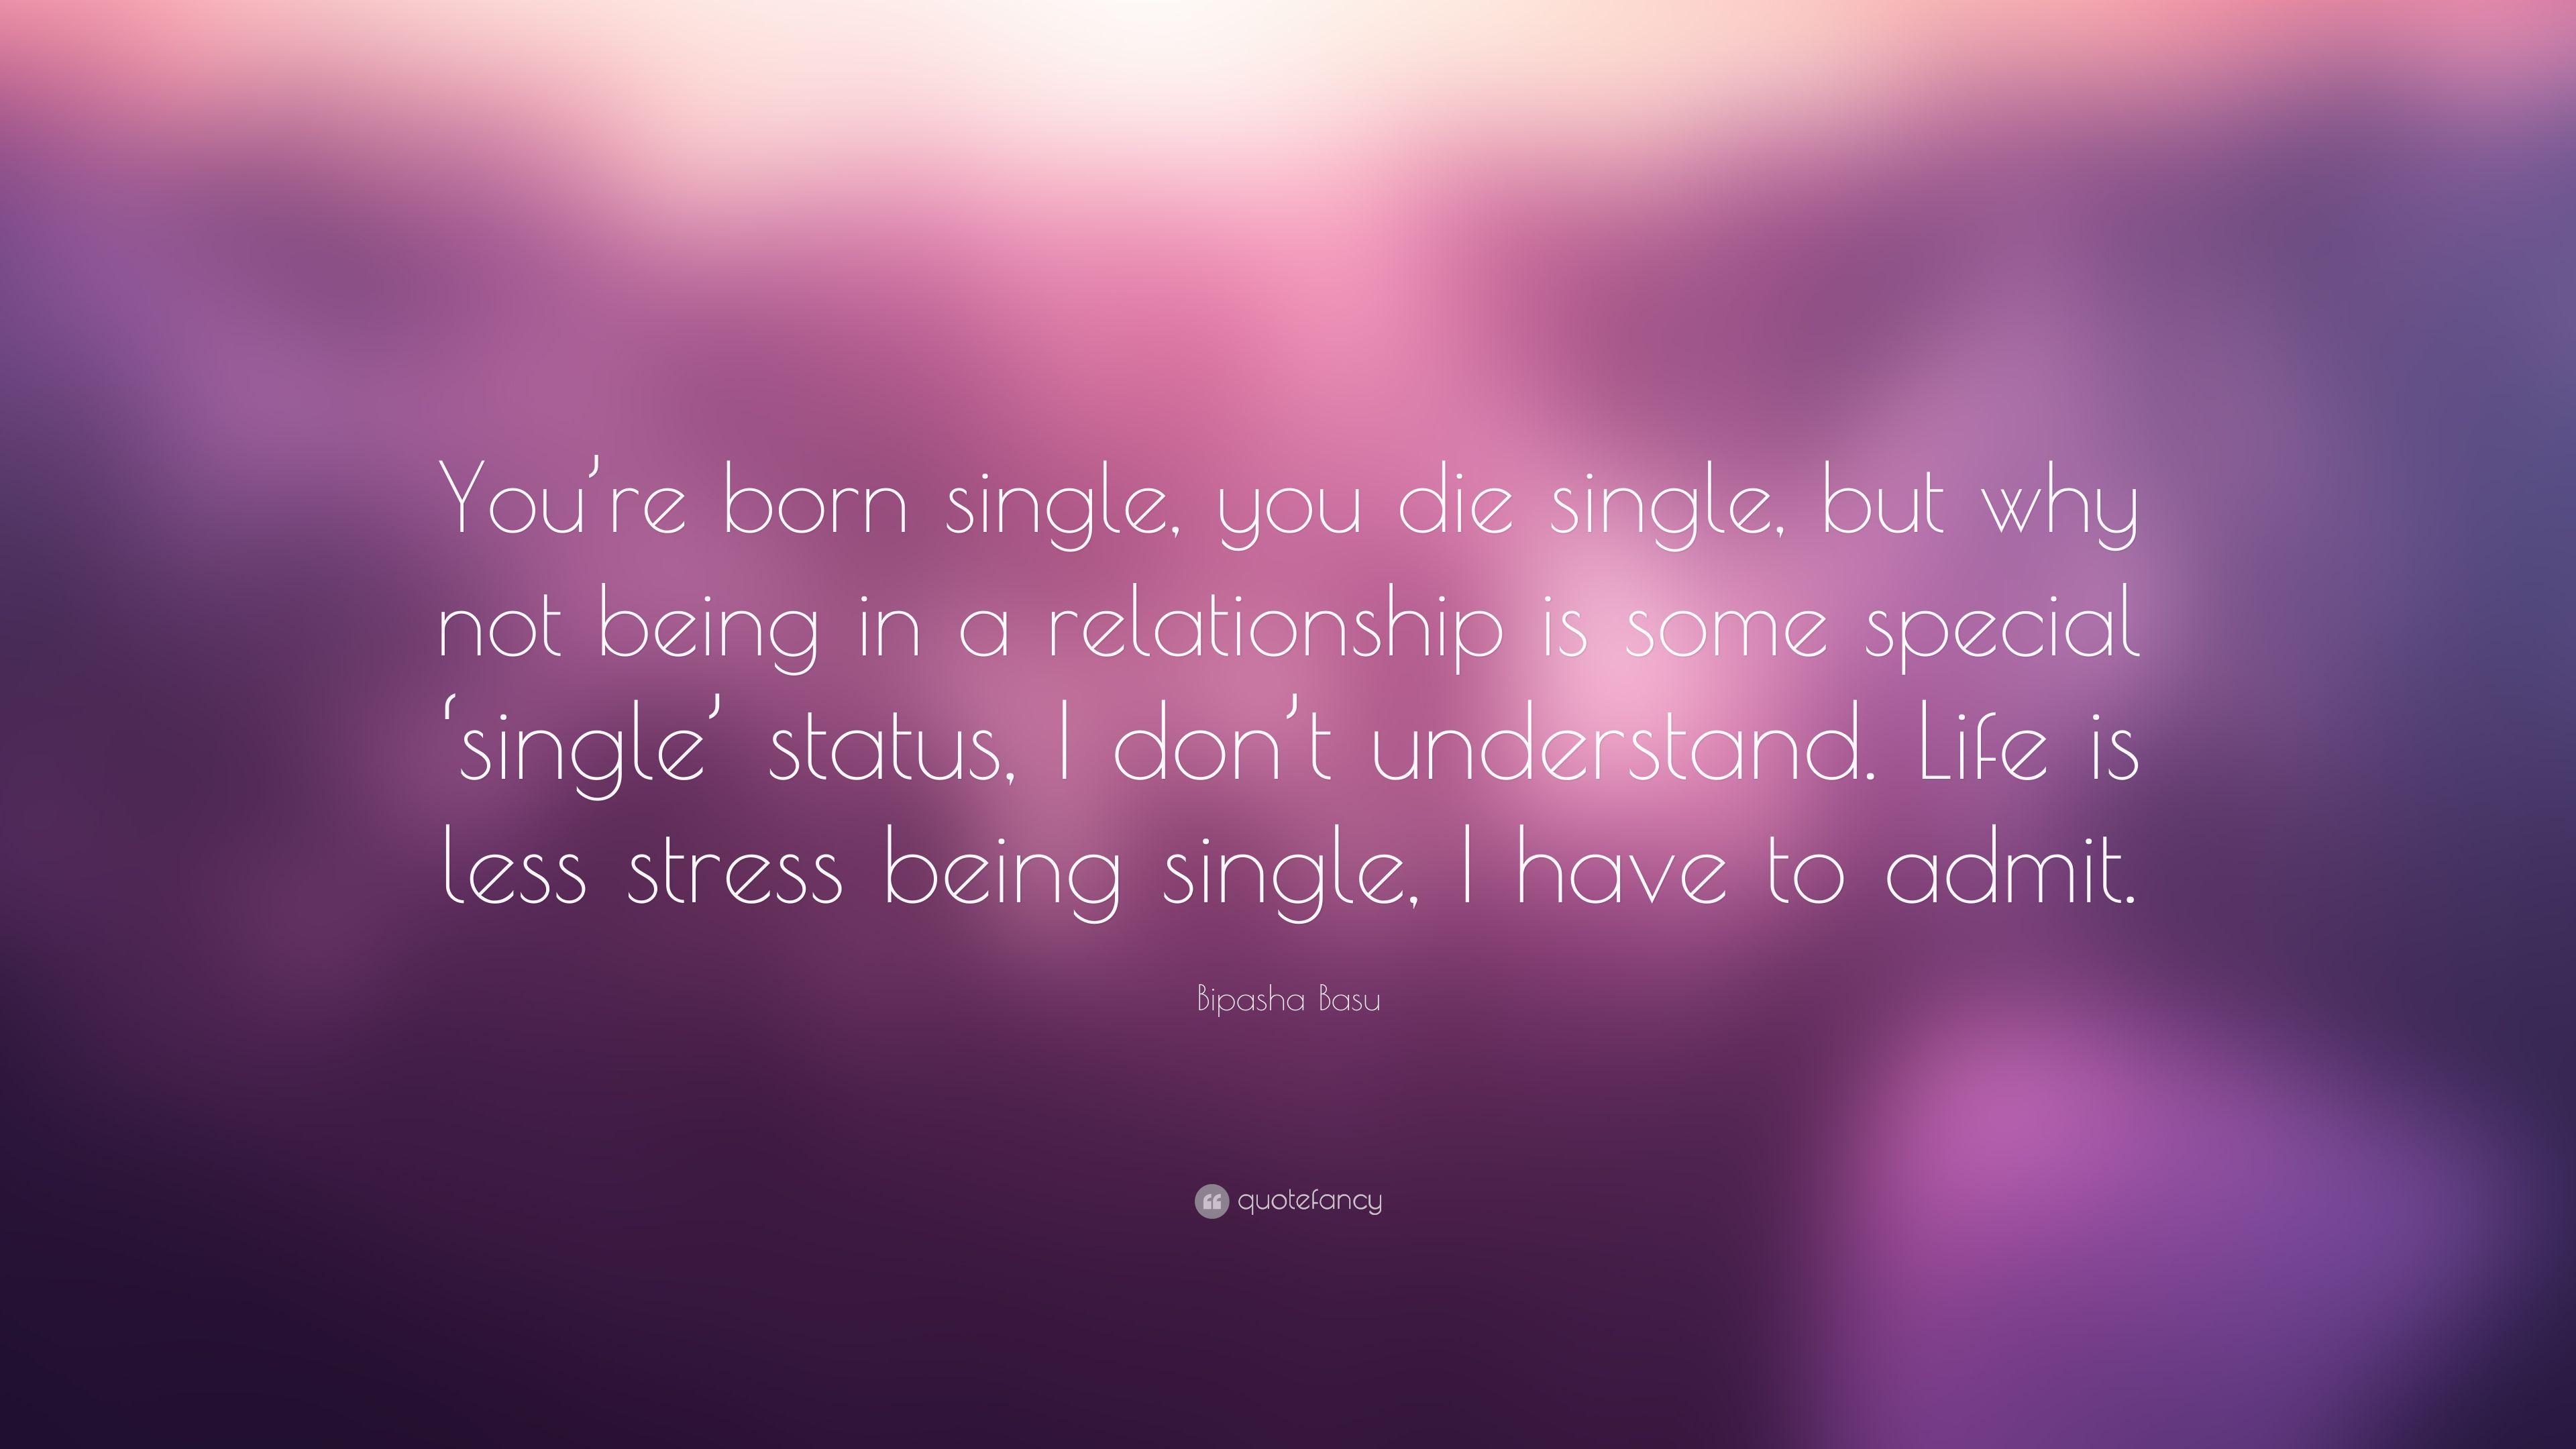 Bipasha Basu Quote: “You're born single, you die single, but why not being in a relationship is some special 'single' status, I don't underst.” (7 wallpaper)